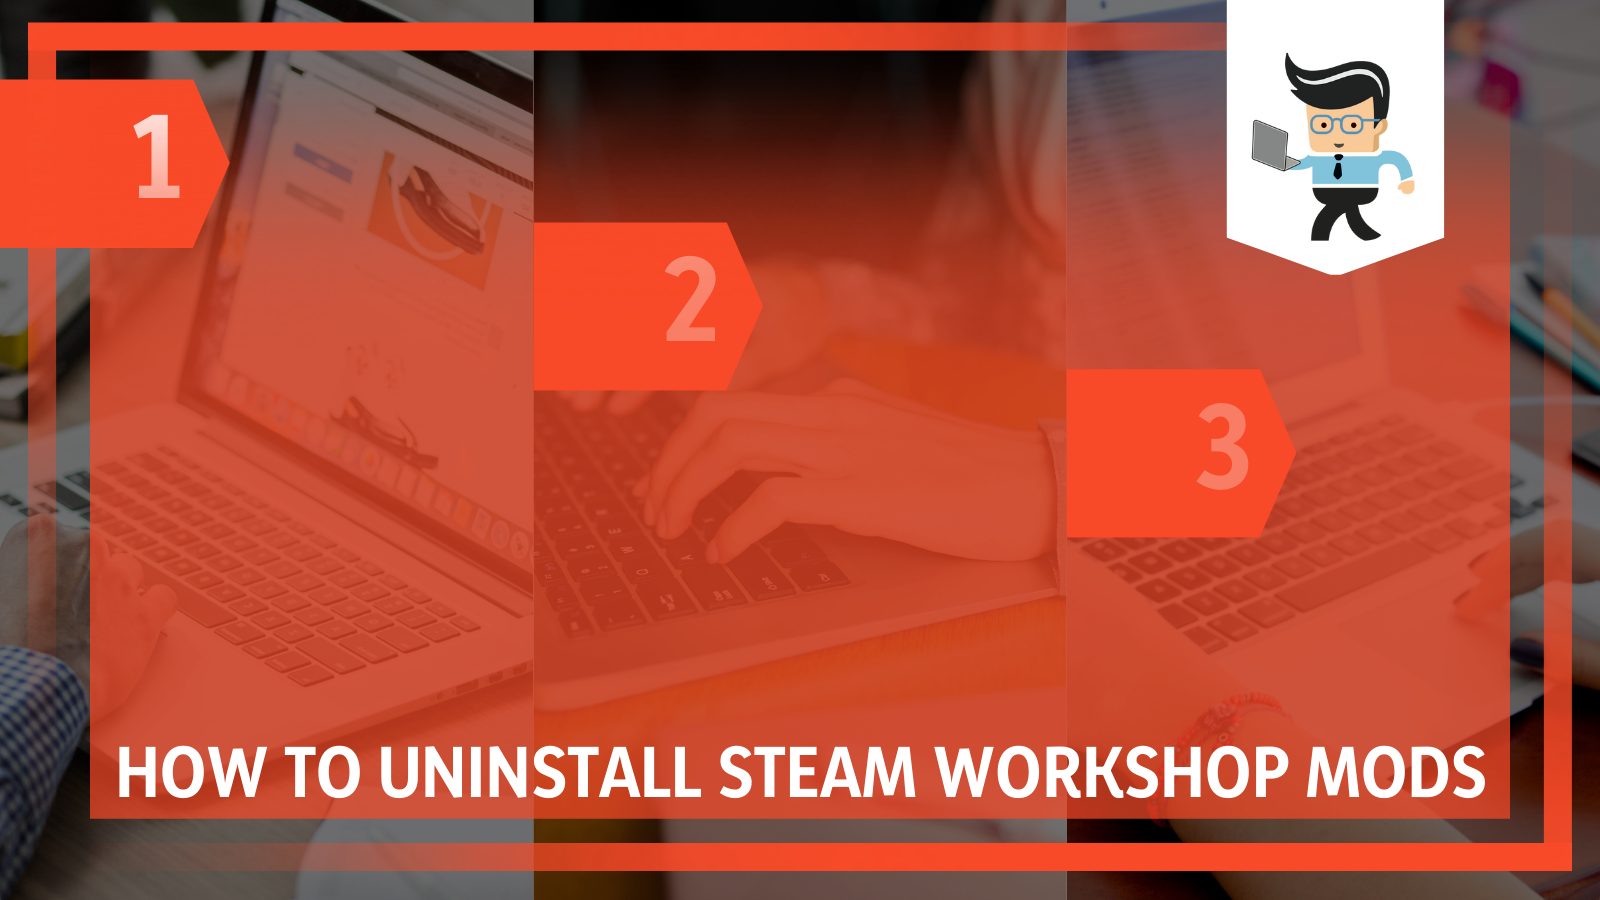 How to Uninstall Steam Workshop Mods